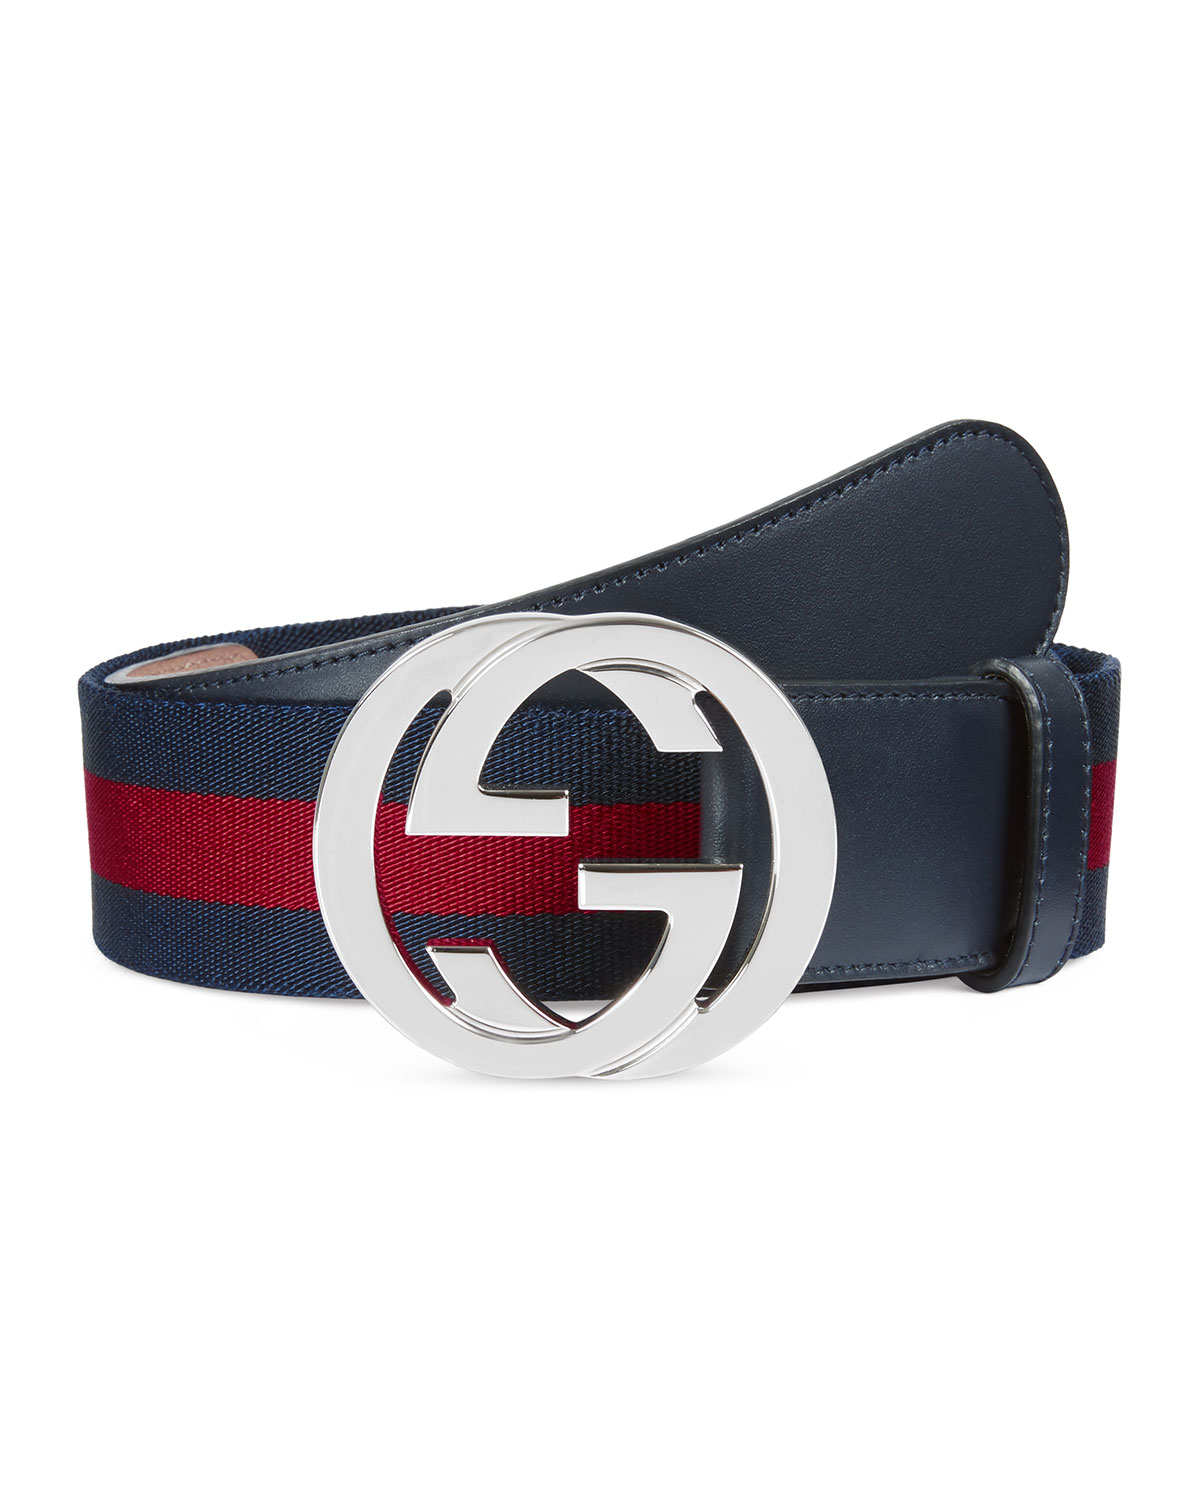 web belt with g buckle